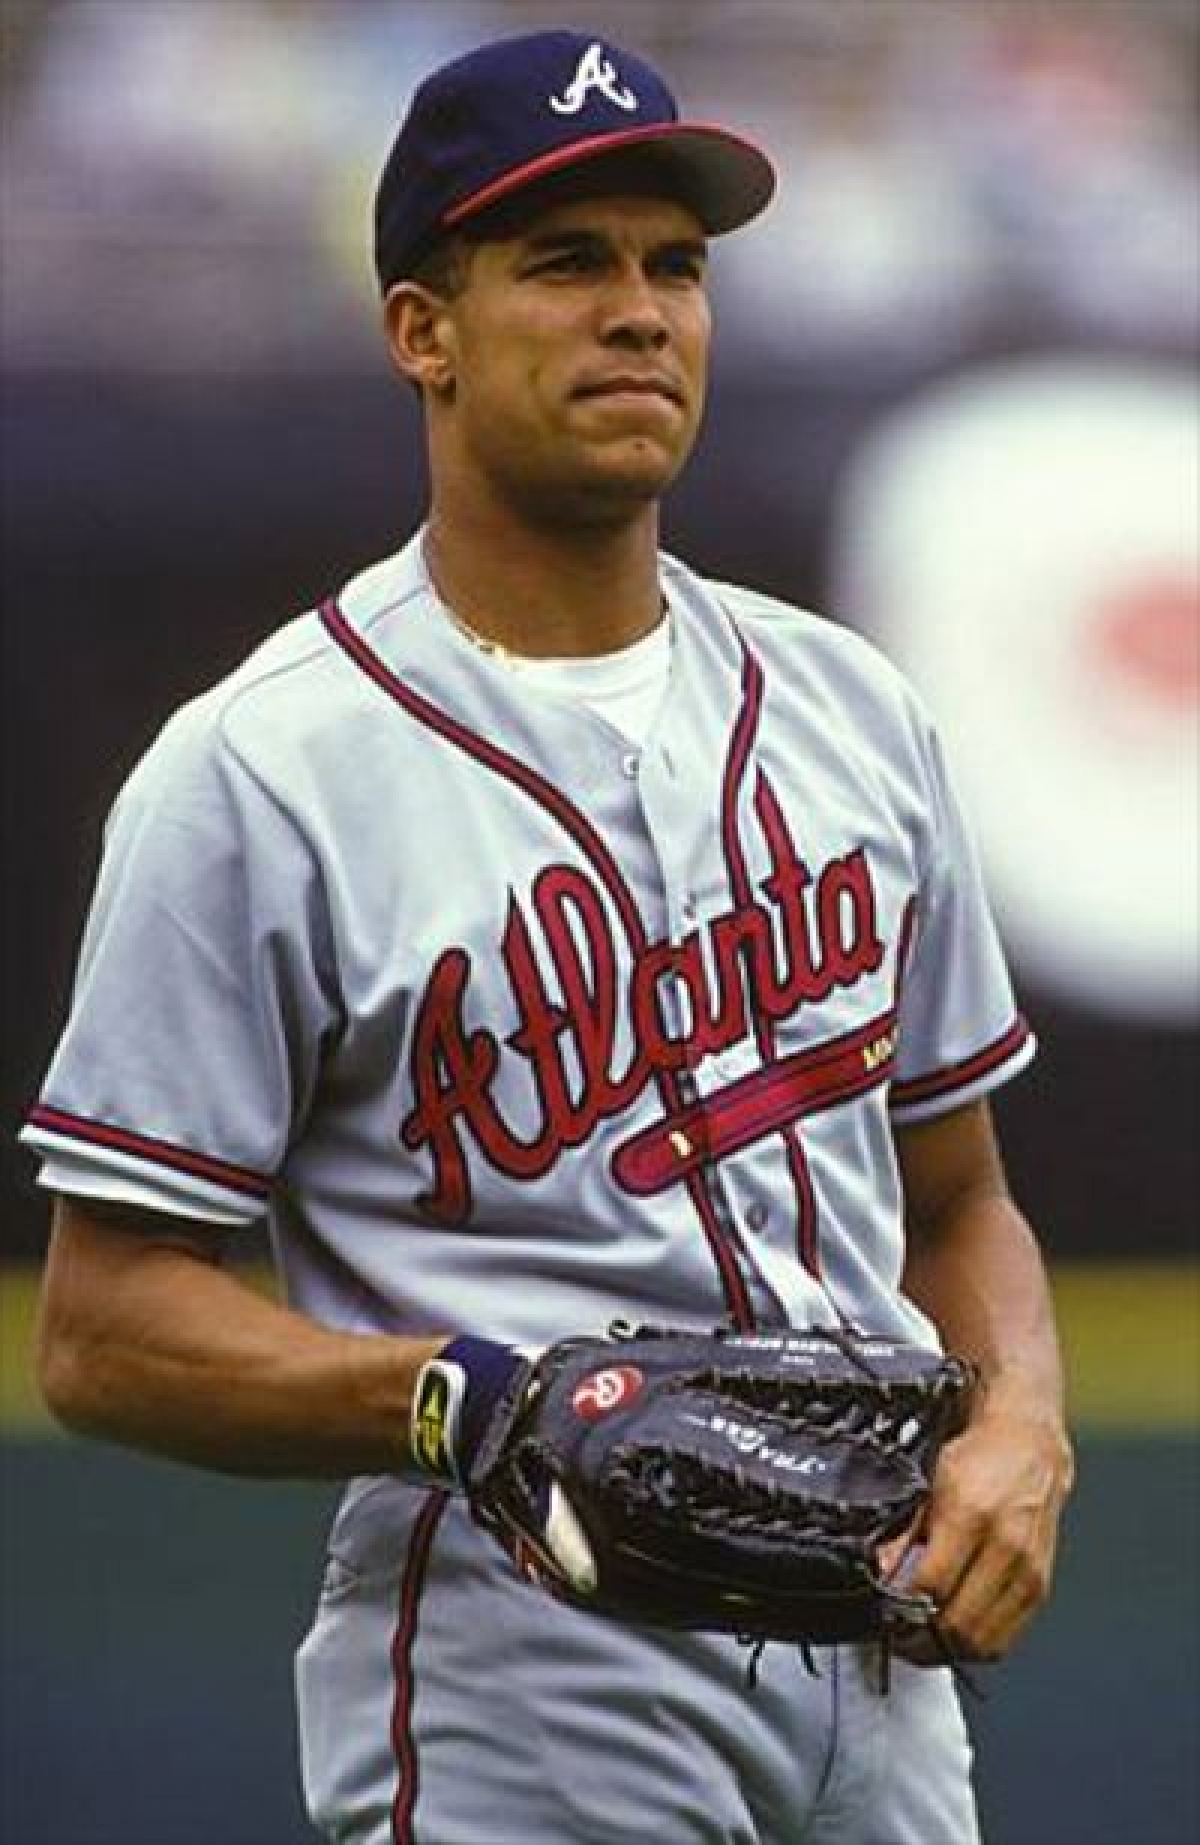 Not in Hall of Fame - 29. David Justice